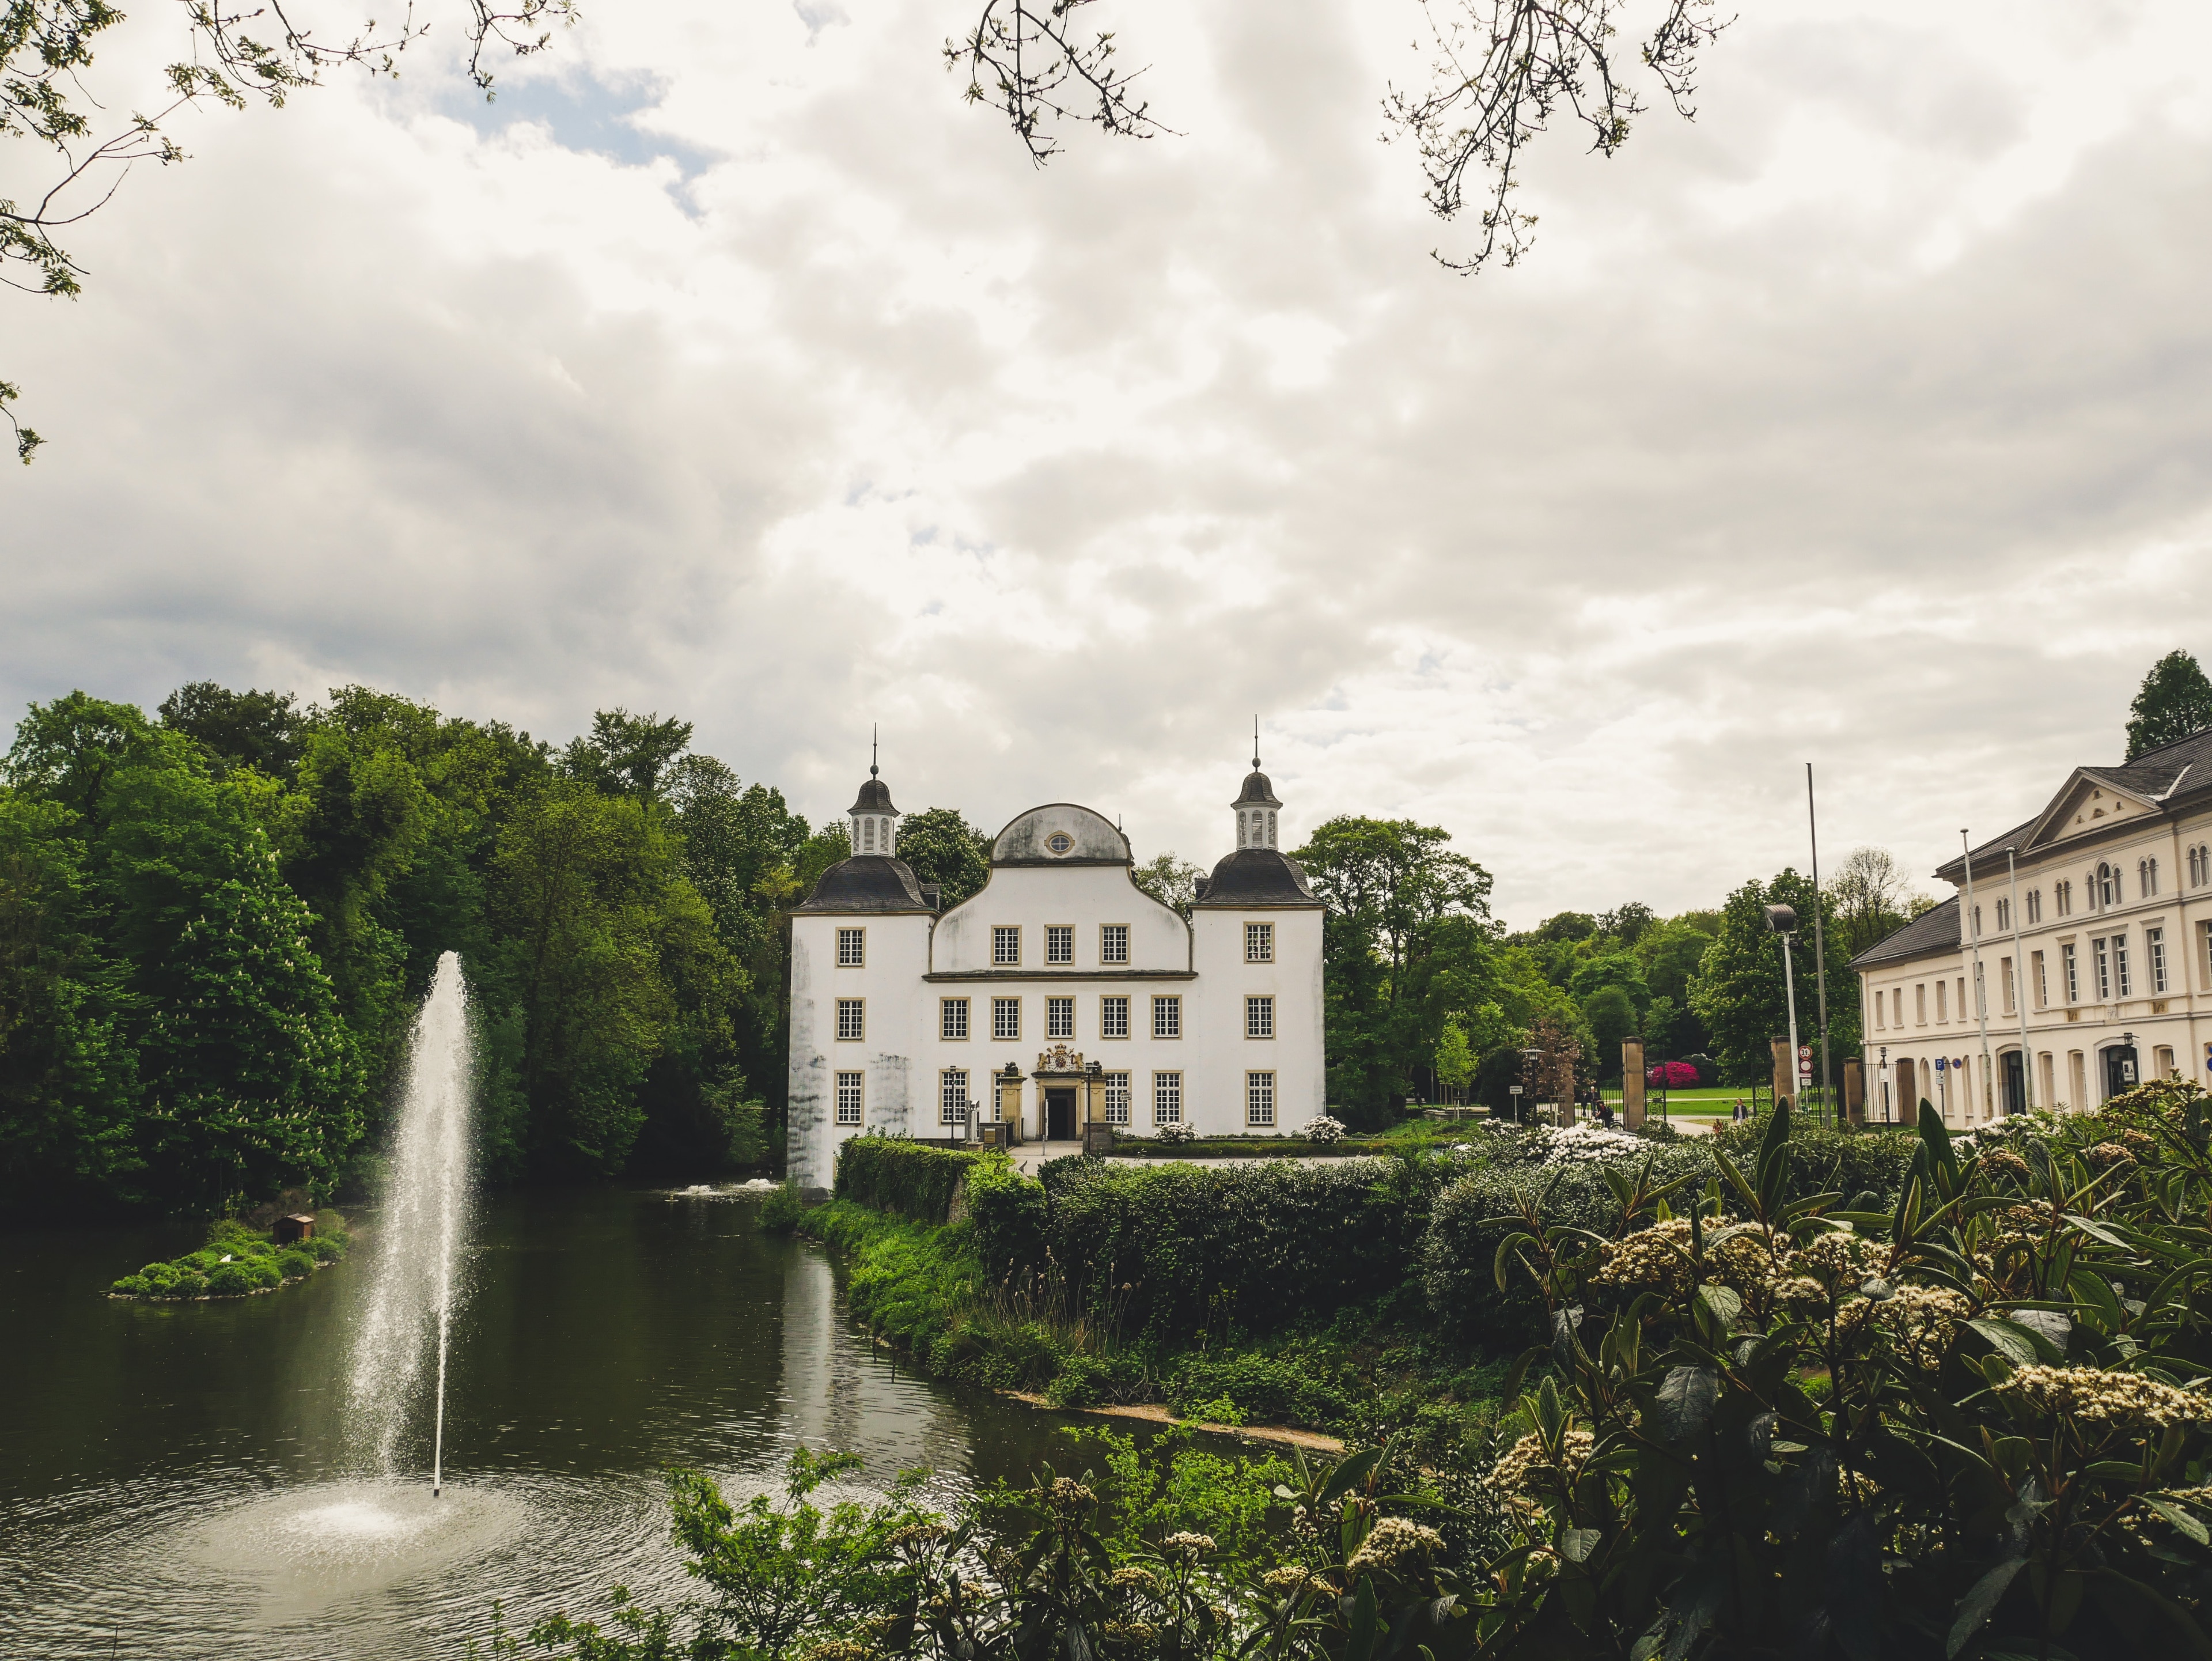 Schloss Borbeck is a famous wedding location in Essen, Germany and has a beautiful park right behind it. 